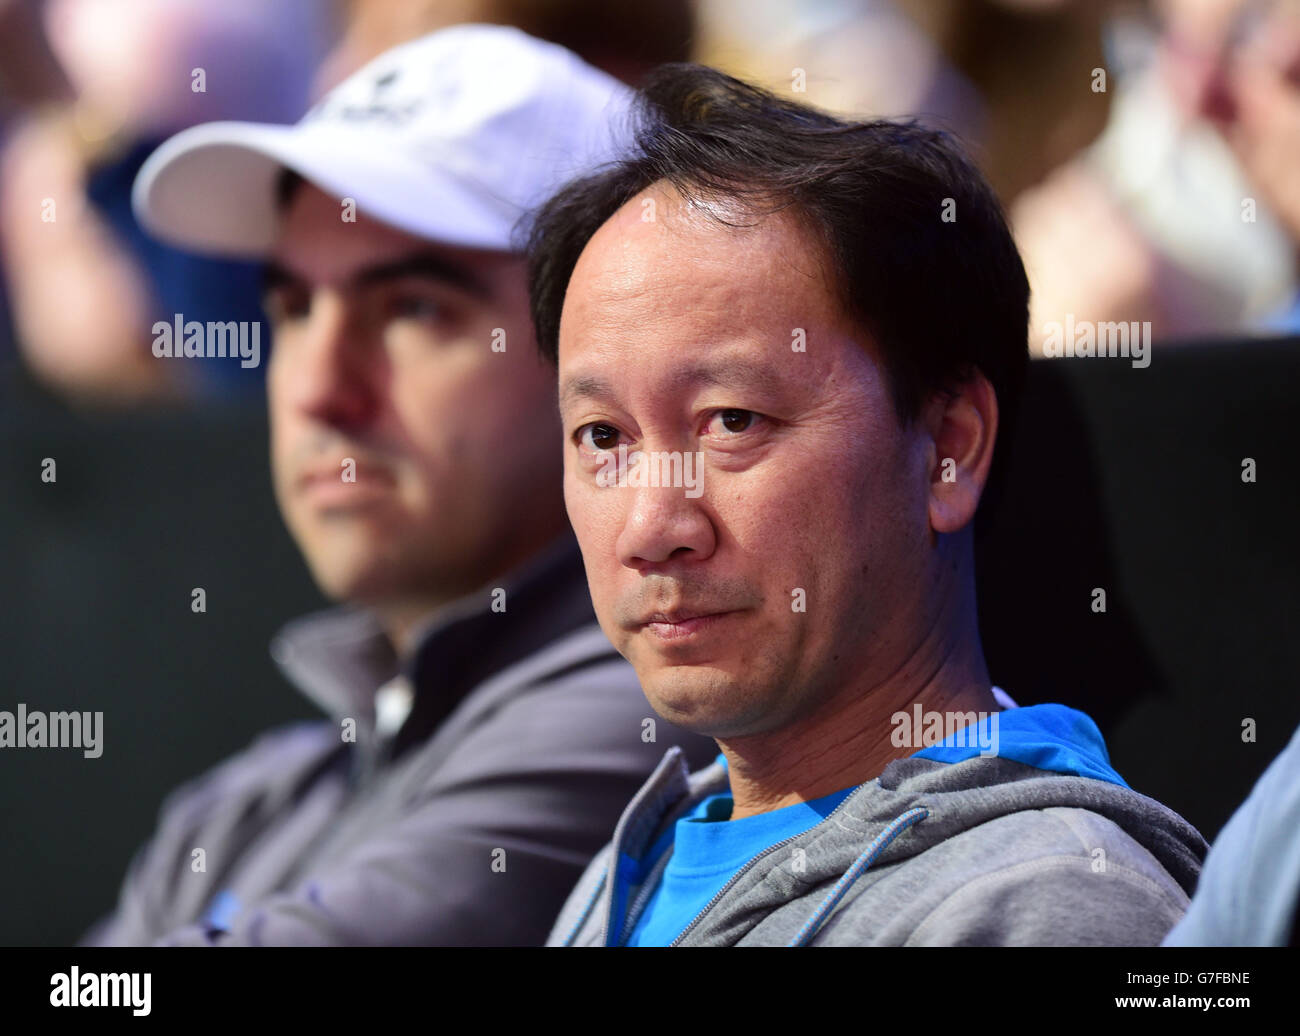 Former Grand Slam Winner Michael Chang and now Kei Nishikori's Trainer during the Barclays ATP World Tour Finals at The O2 Arena, London. PRESS ASSOCIATION Photo. Picture date: Tuesday November 11, 2014. See PA story TENNIS London. Photo credit should read Adam Davy/PA Wire. Stock Photo